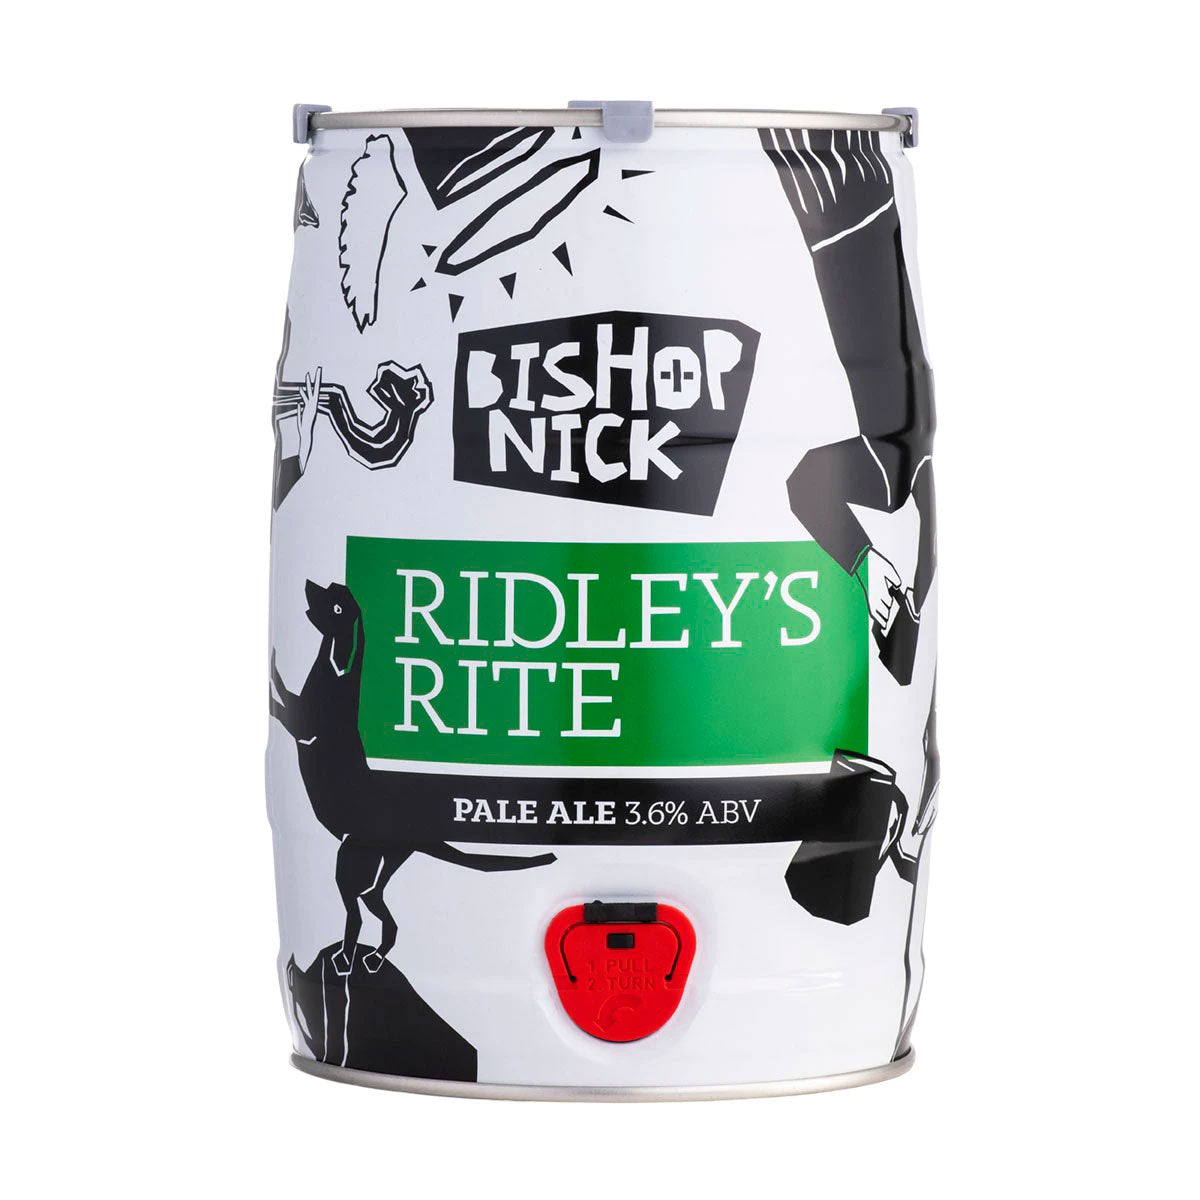 Ridleys Rite Cask from Bishop Nick Brewery